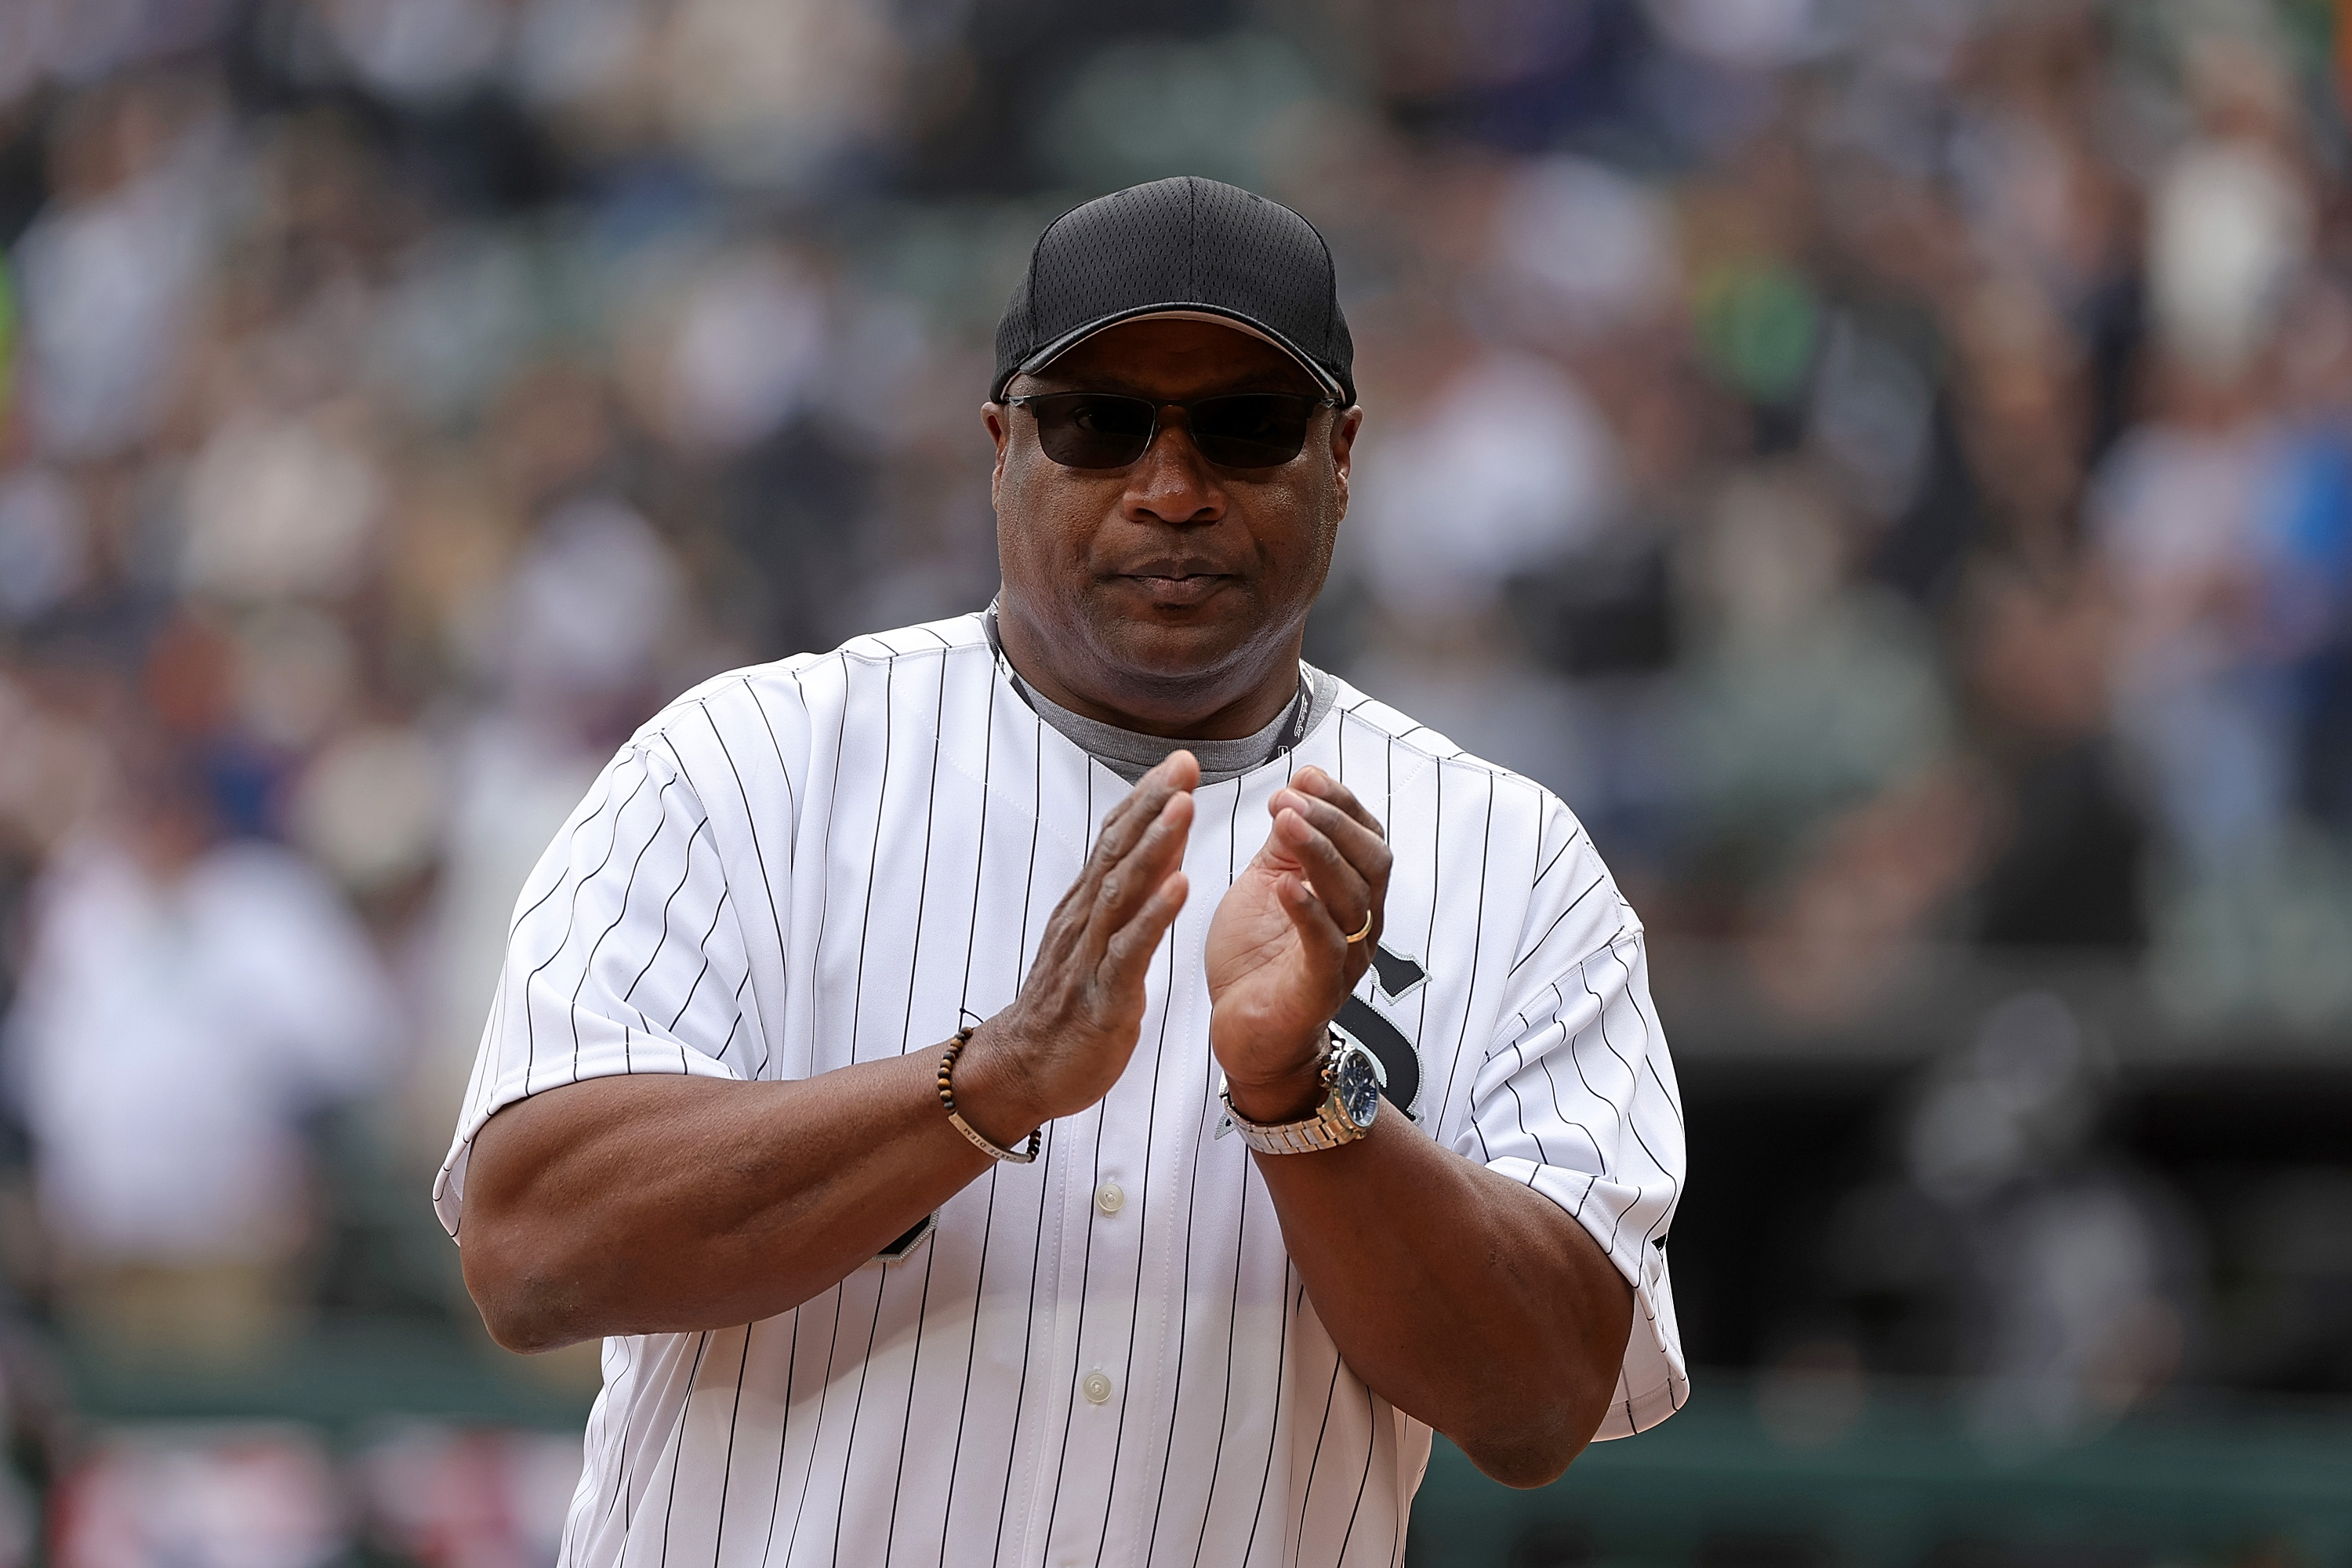 Touched by Uvalde, Bo Jackson Donated to Pay for Funerals